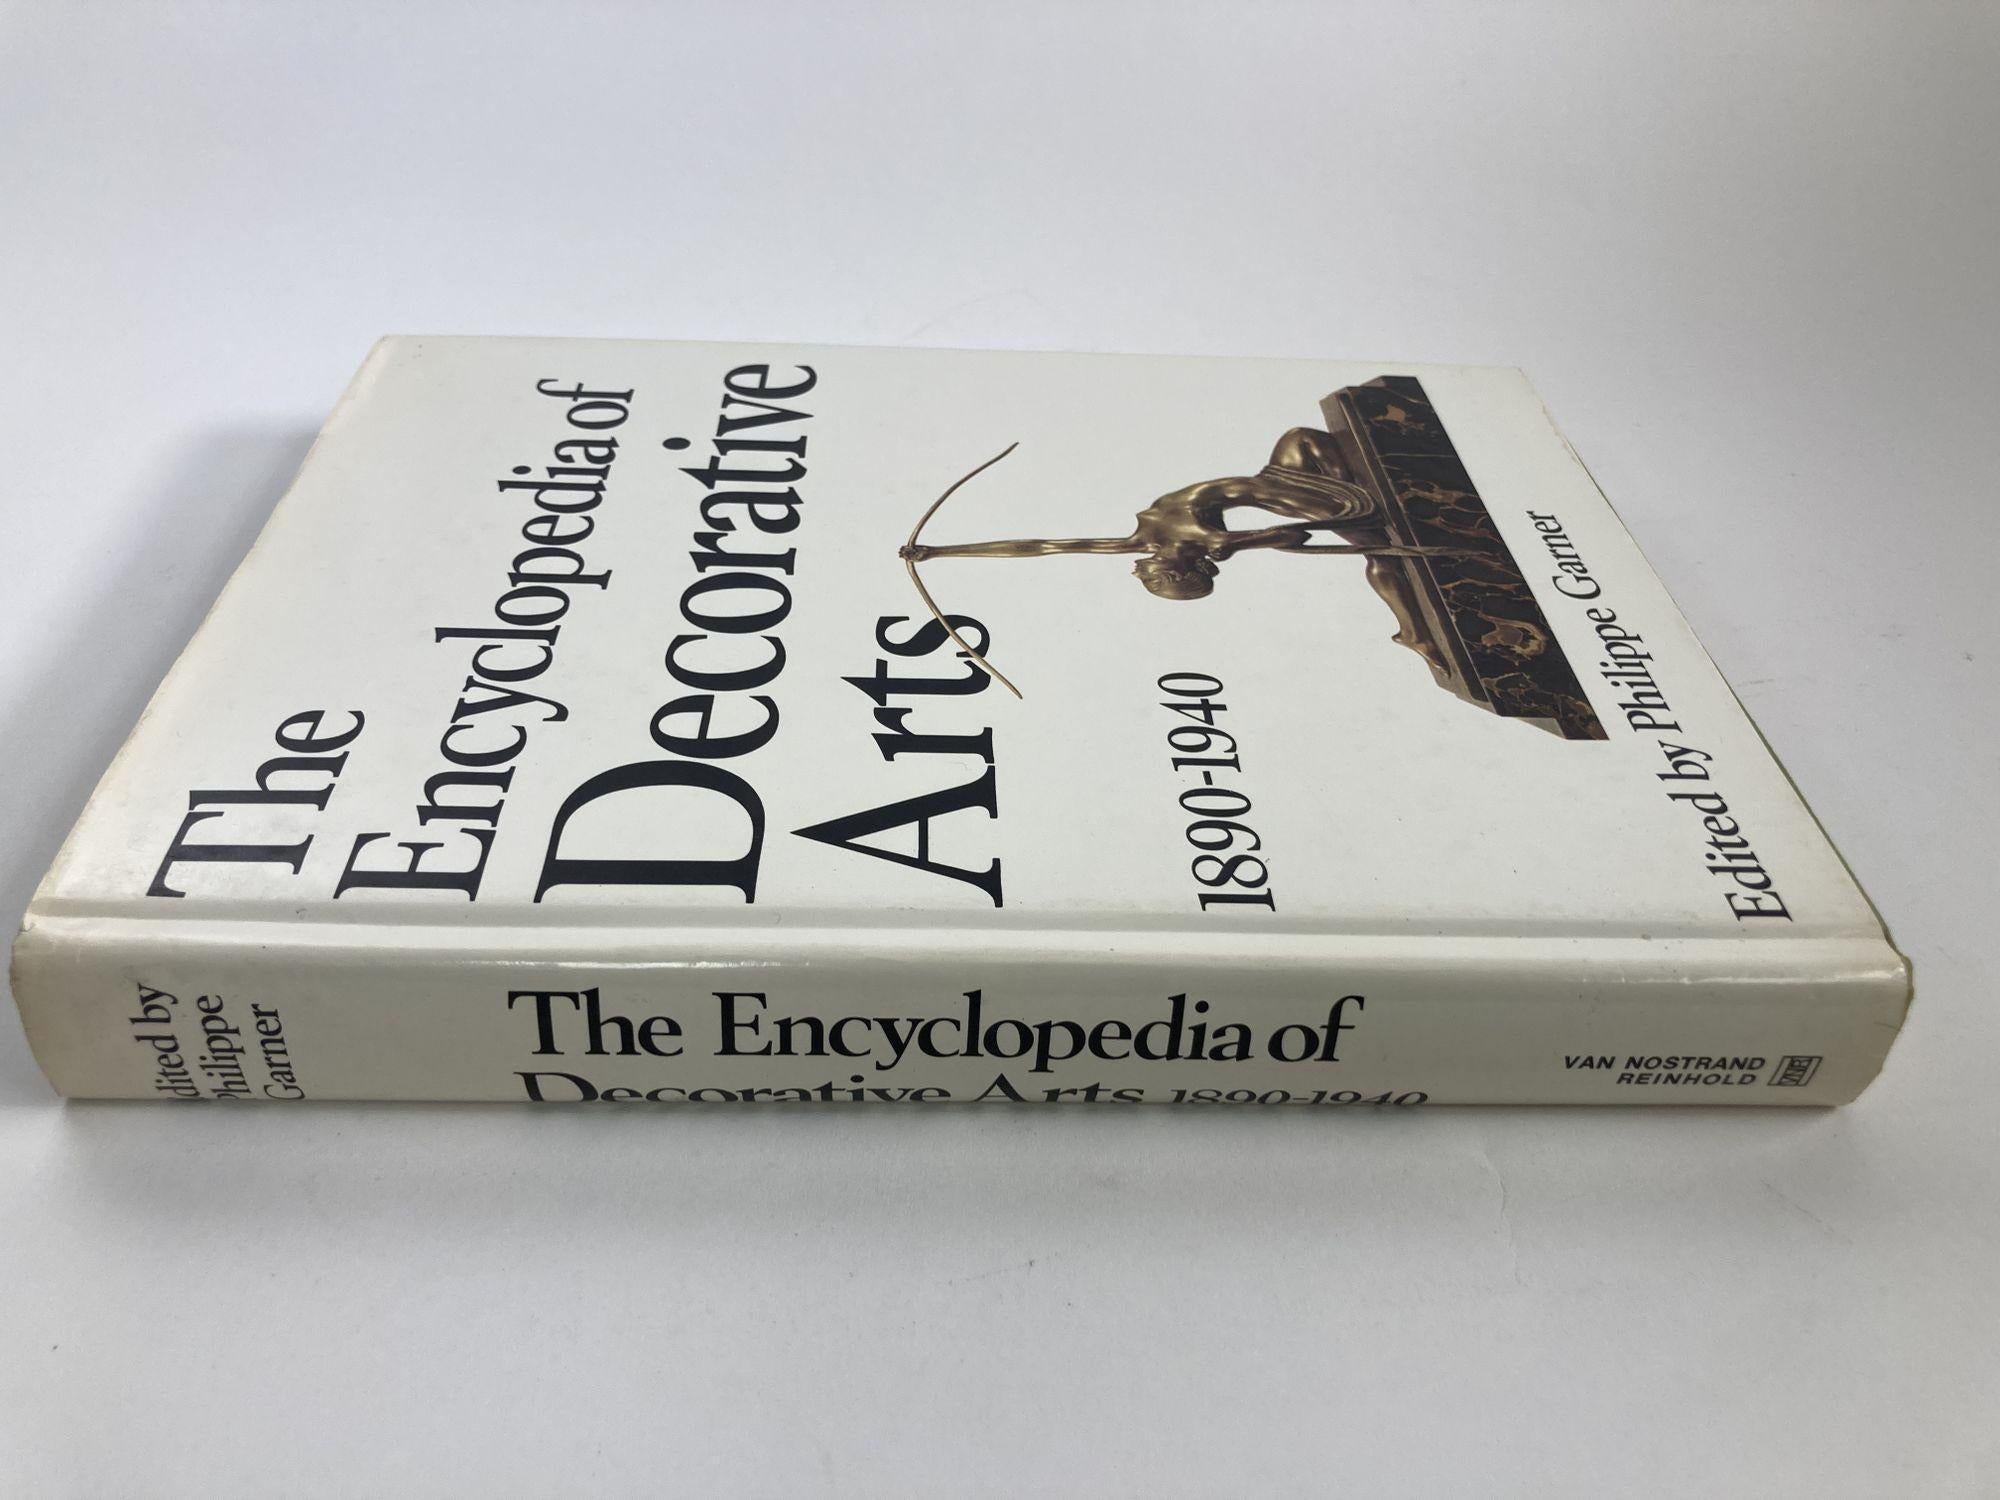 The Encyclopedia of Decorative Arts, 1890-1940.
by Philippe Garner
New York: Van Nostrand Reinhold, 1978. First Edition; First Printing.
Hardcover. Book condition is very good; with a very good dust jacket.
Minor edge wear to jacket. A few